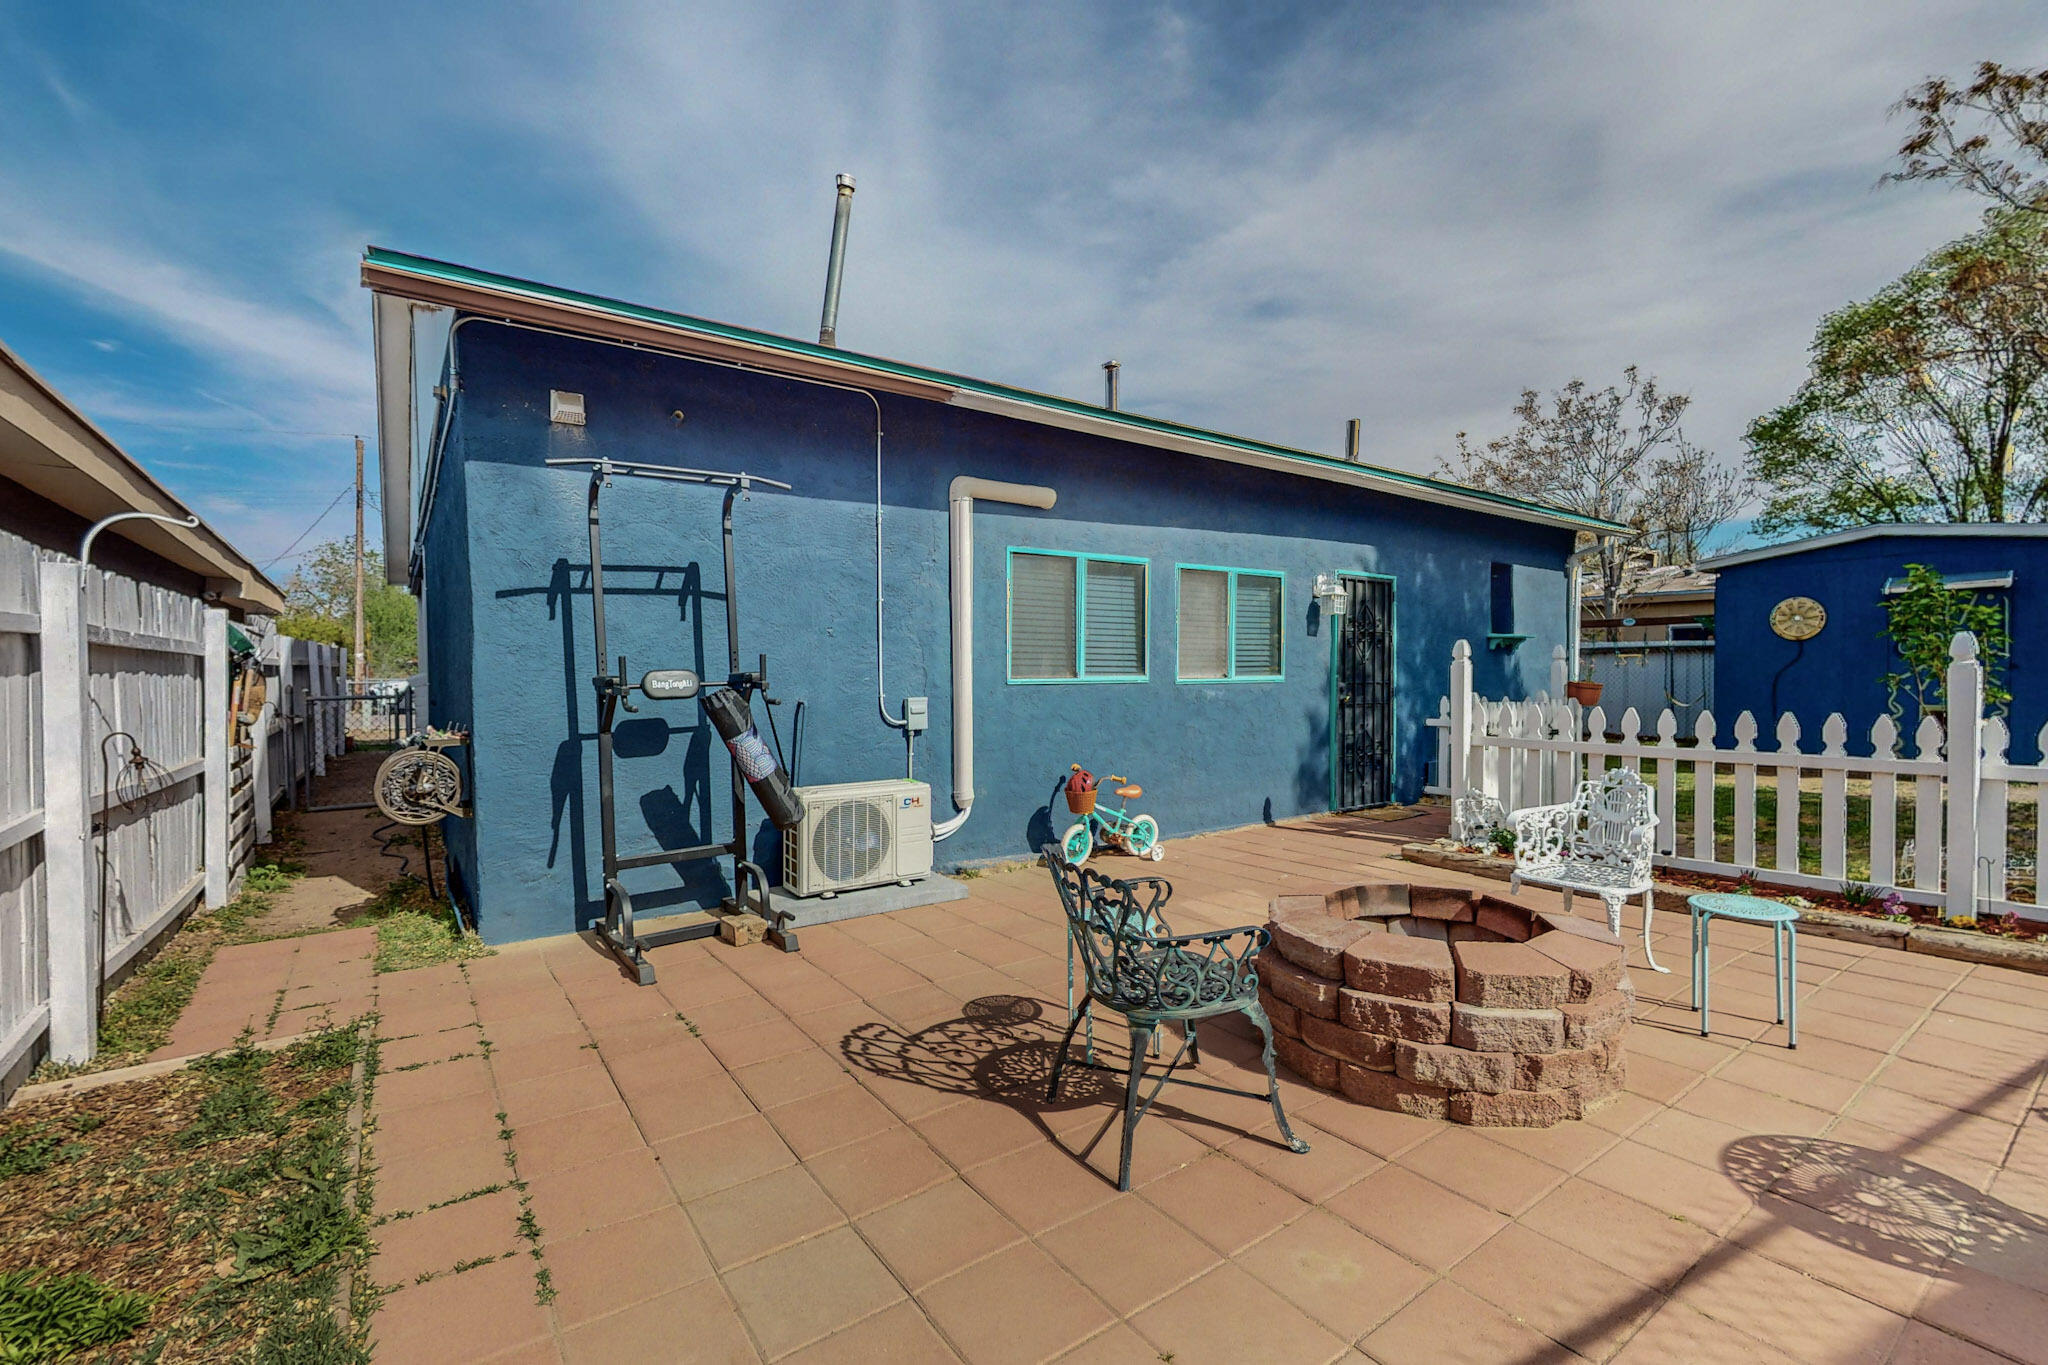 847 Arthur Drive SW, Albuquerque, New Mexico 87105, 2 Bedrooms Bedrooms, ,1 BathroomBathrooms,Residential,For Sale,847 Arthur Drive SW,1060274